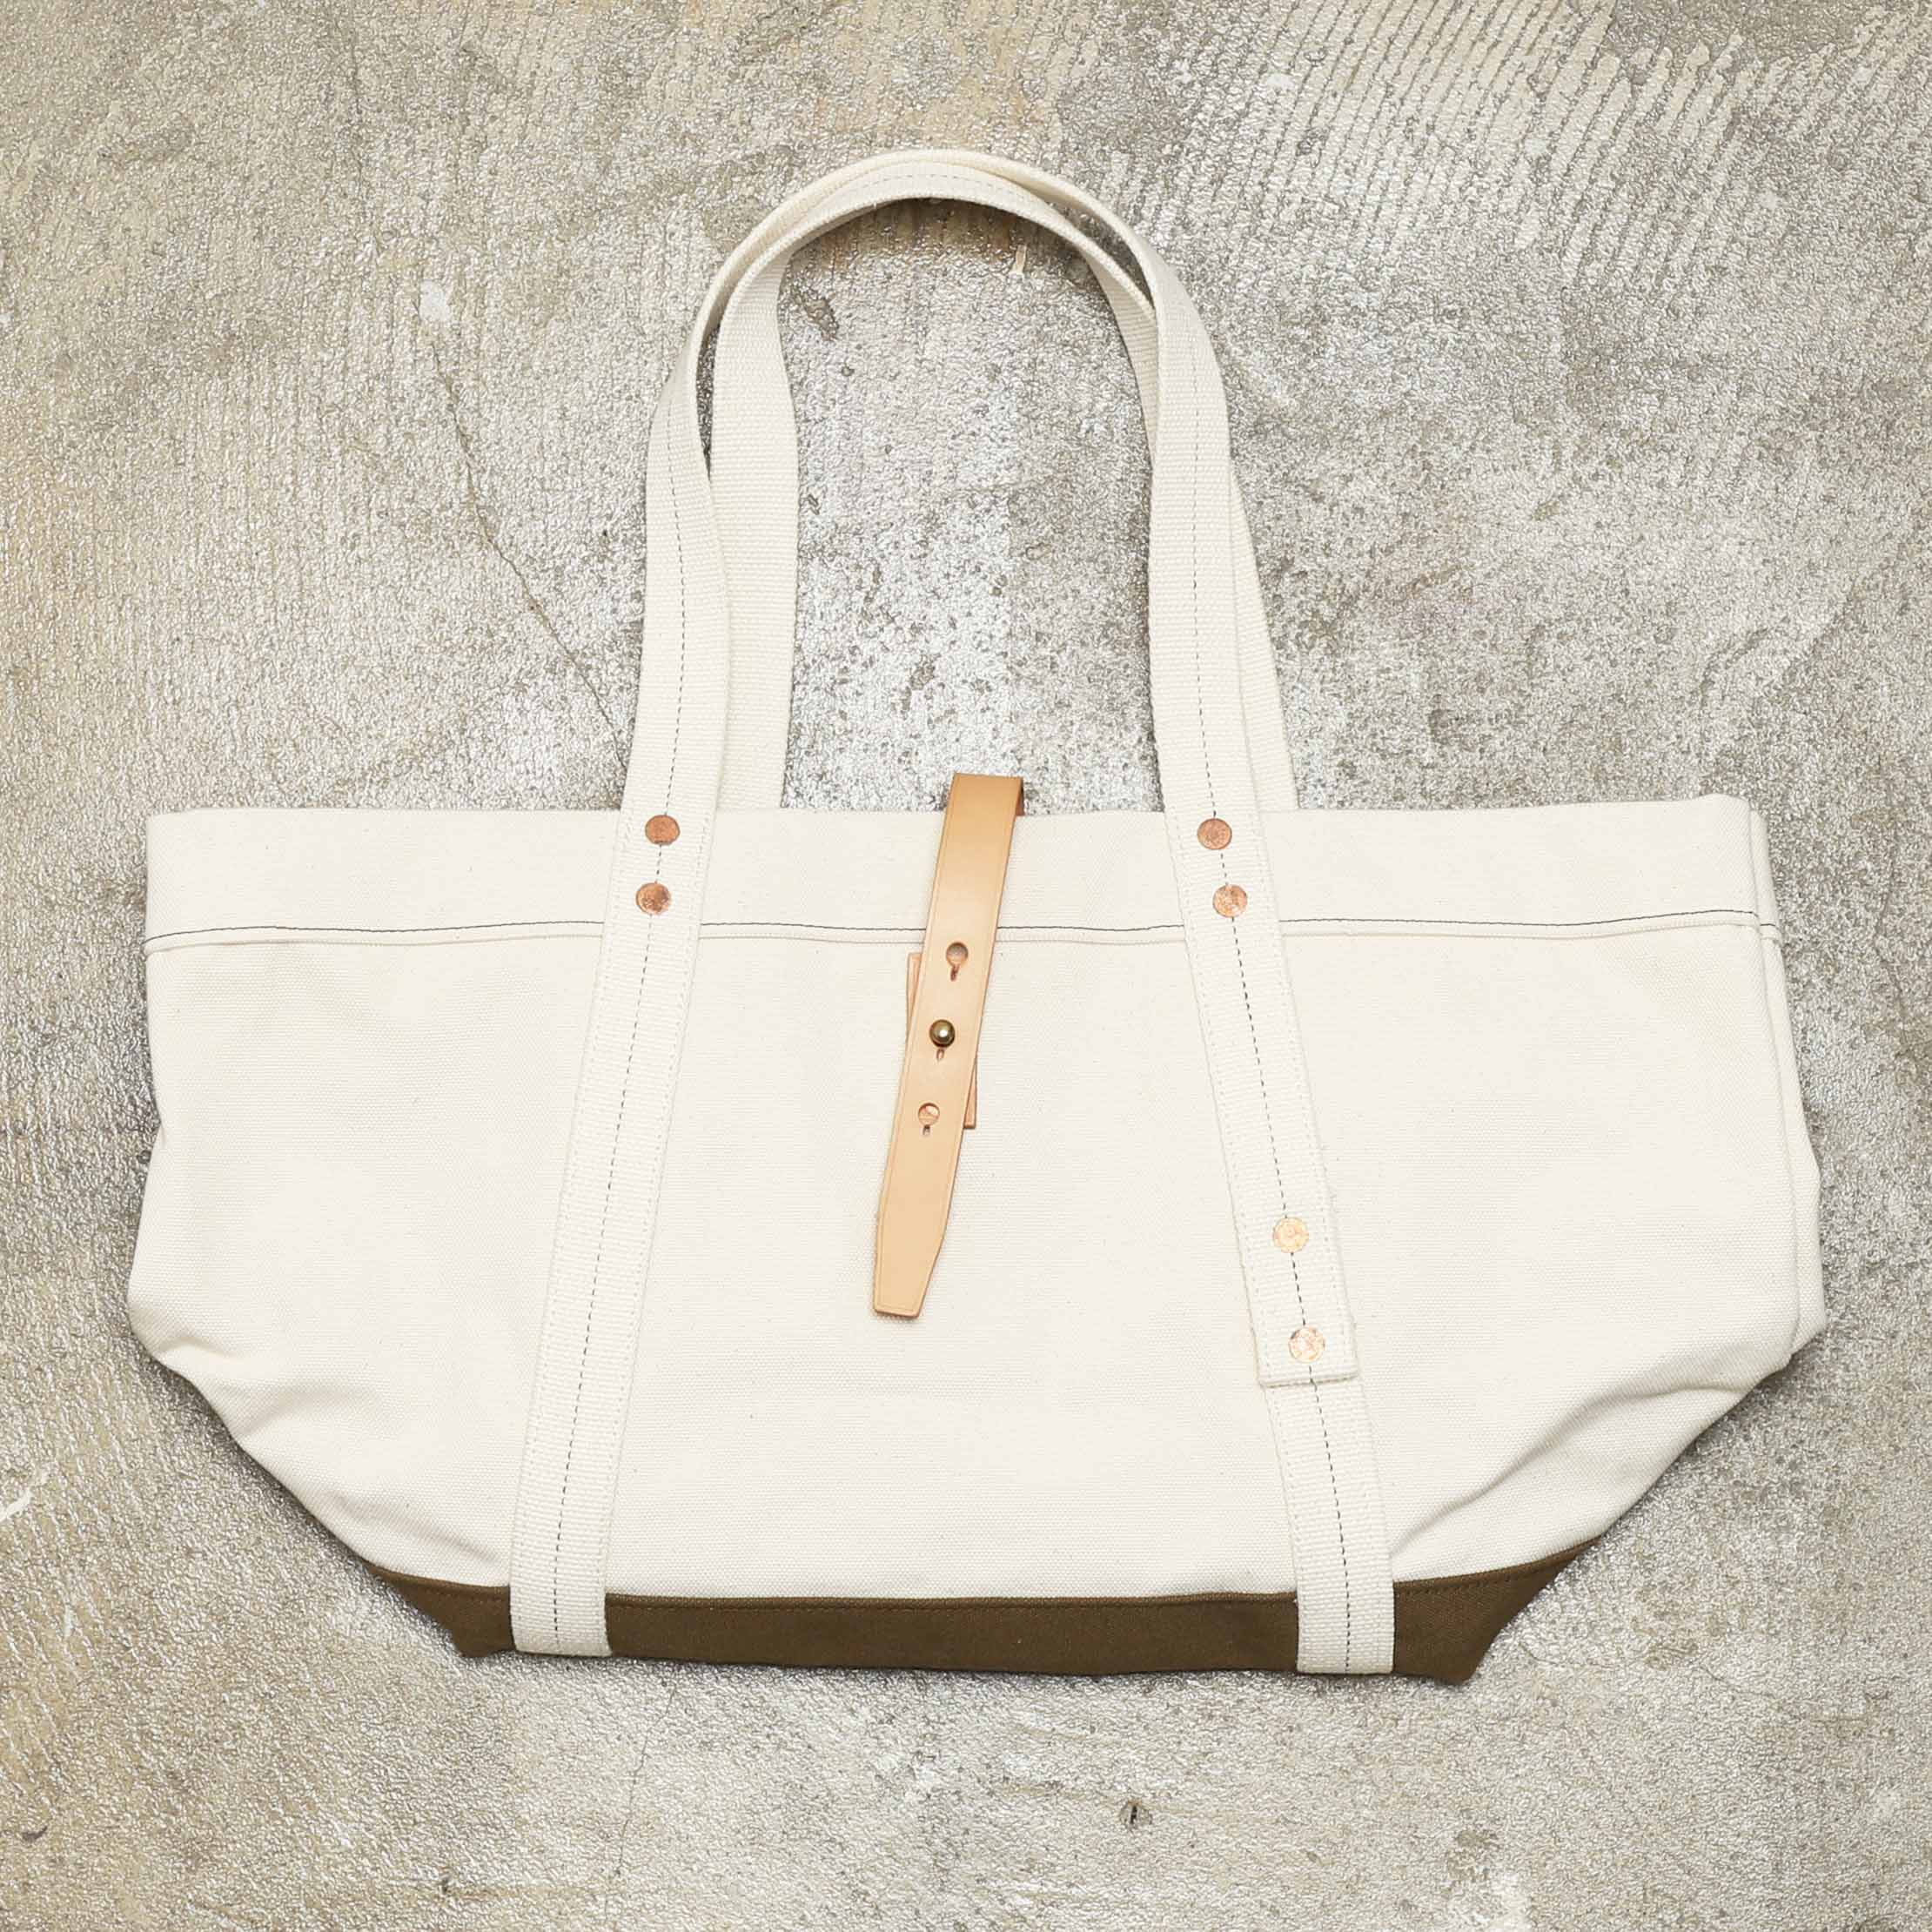 RALPH LAUREN RUGBY HEAVY CANVAS TOTE BAG - NATURAL/OLIVE